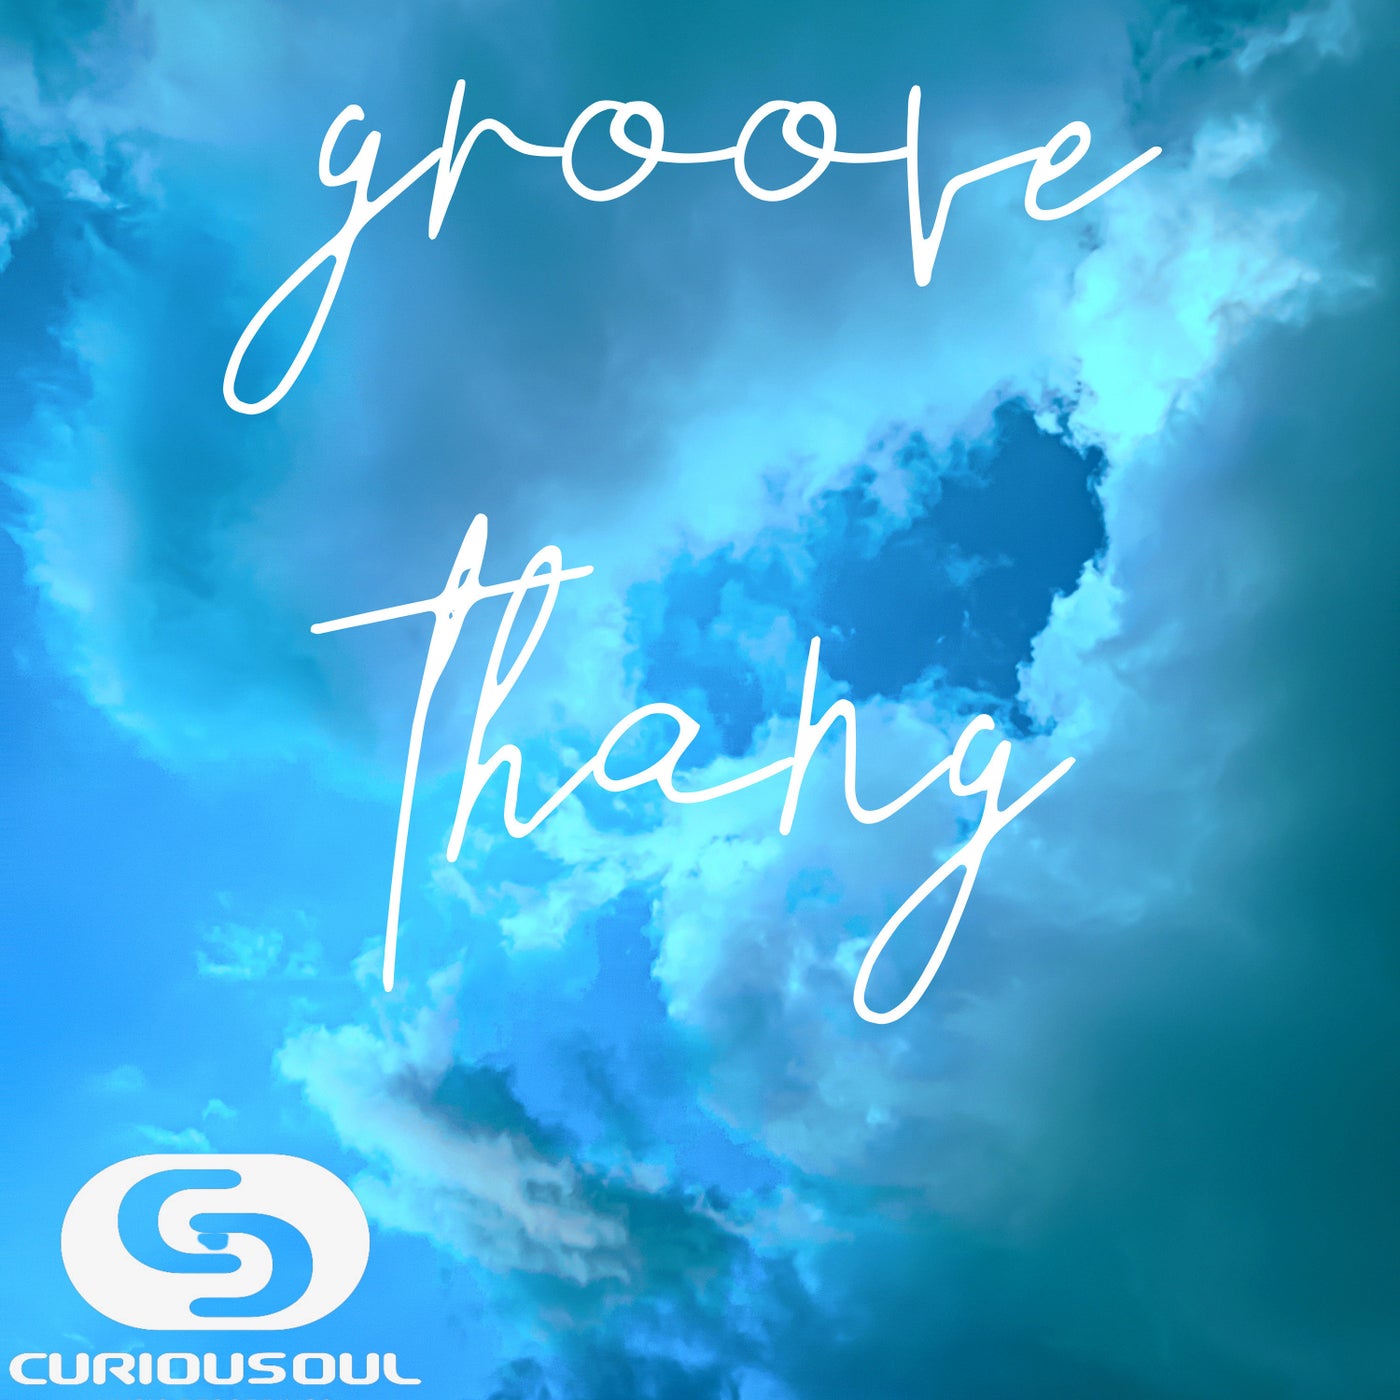 Groove Thang